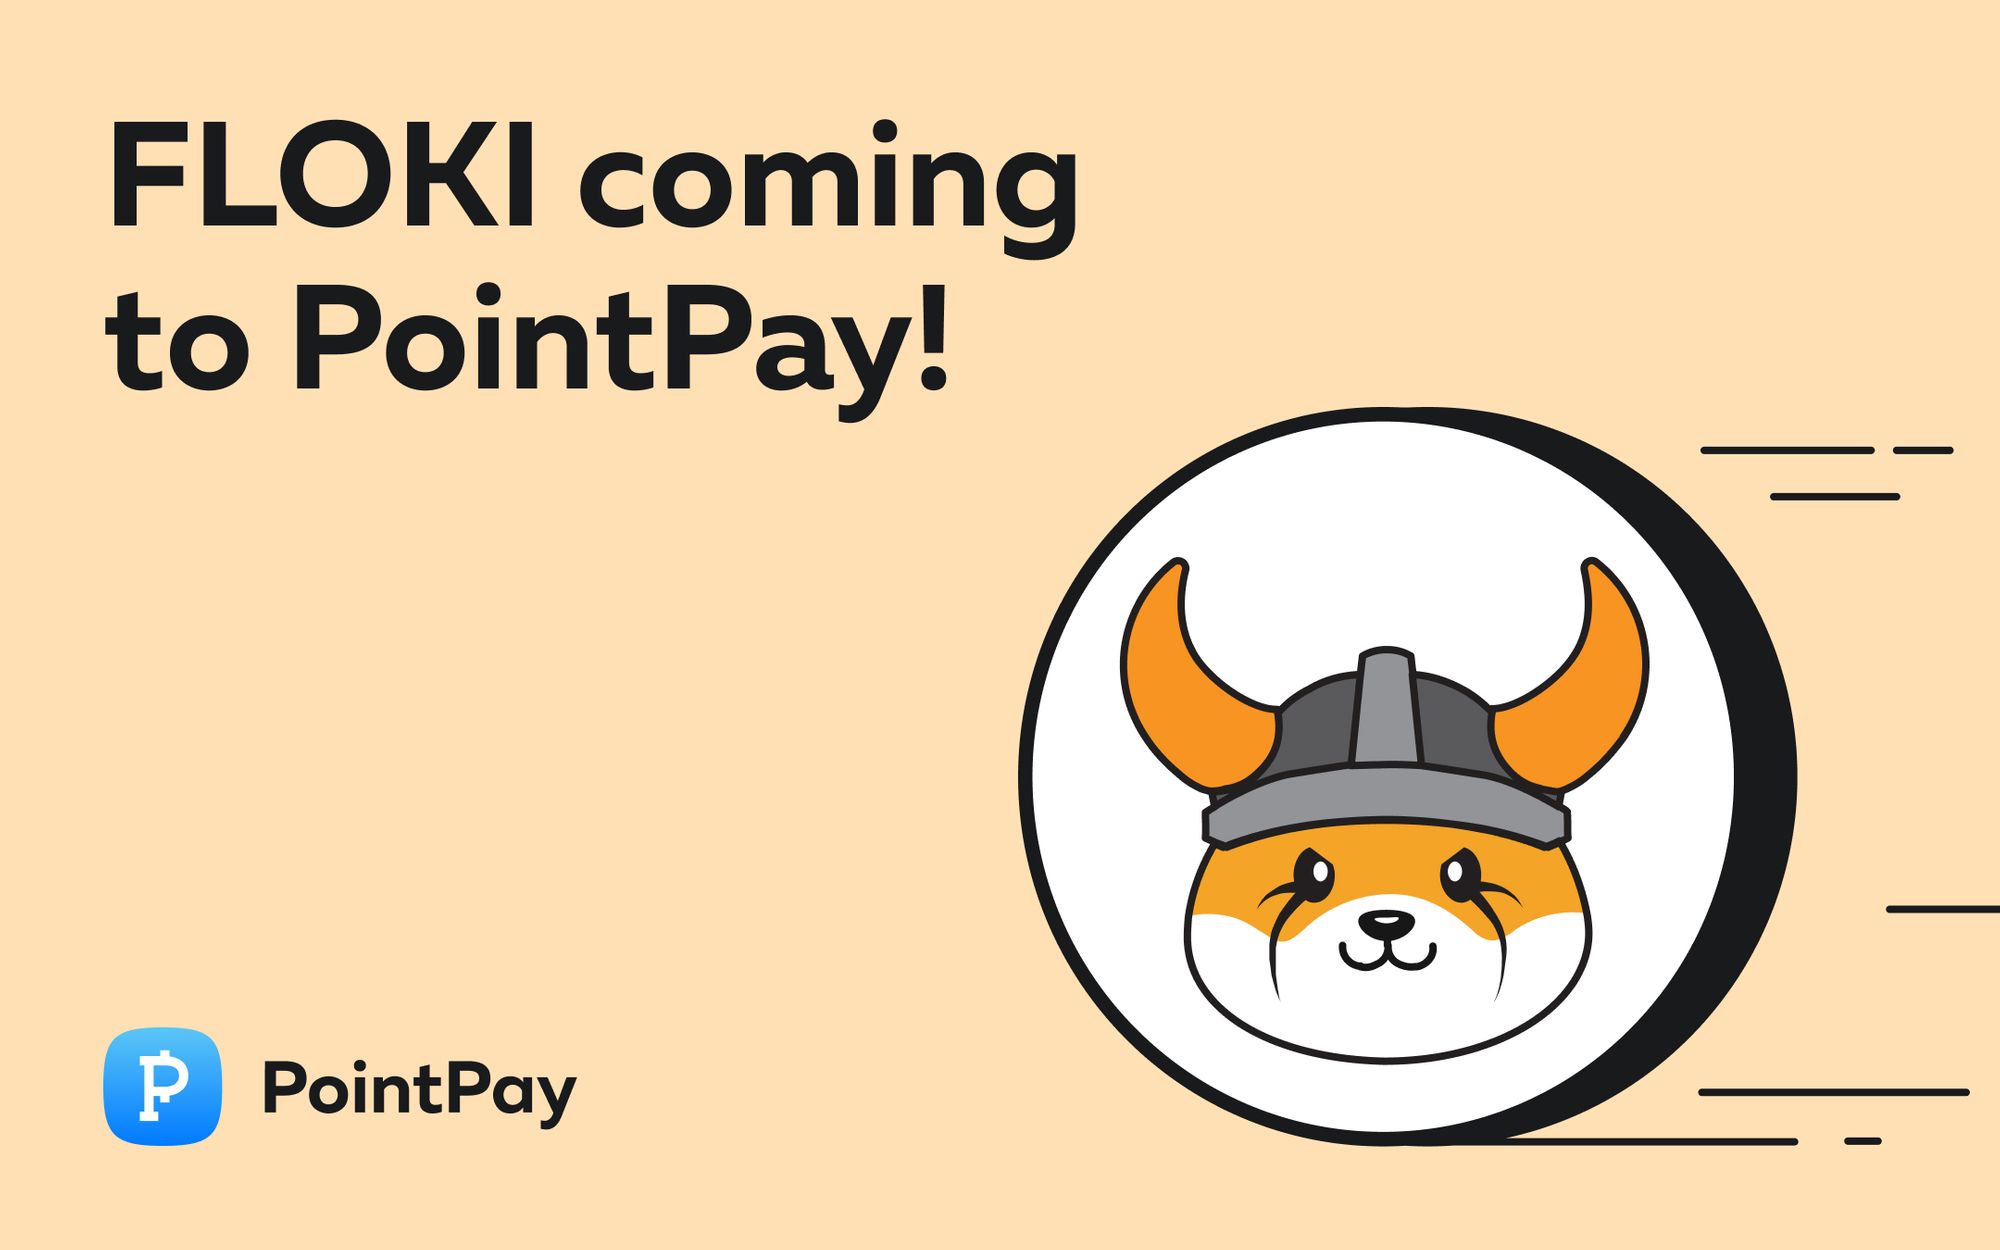 PointPay is listing the FLOKI token